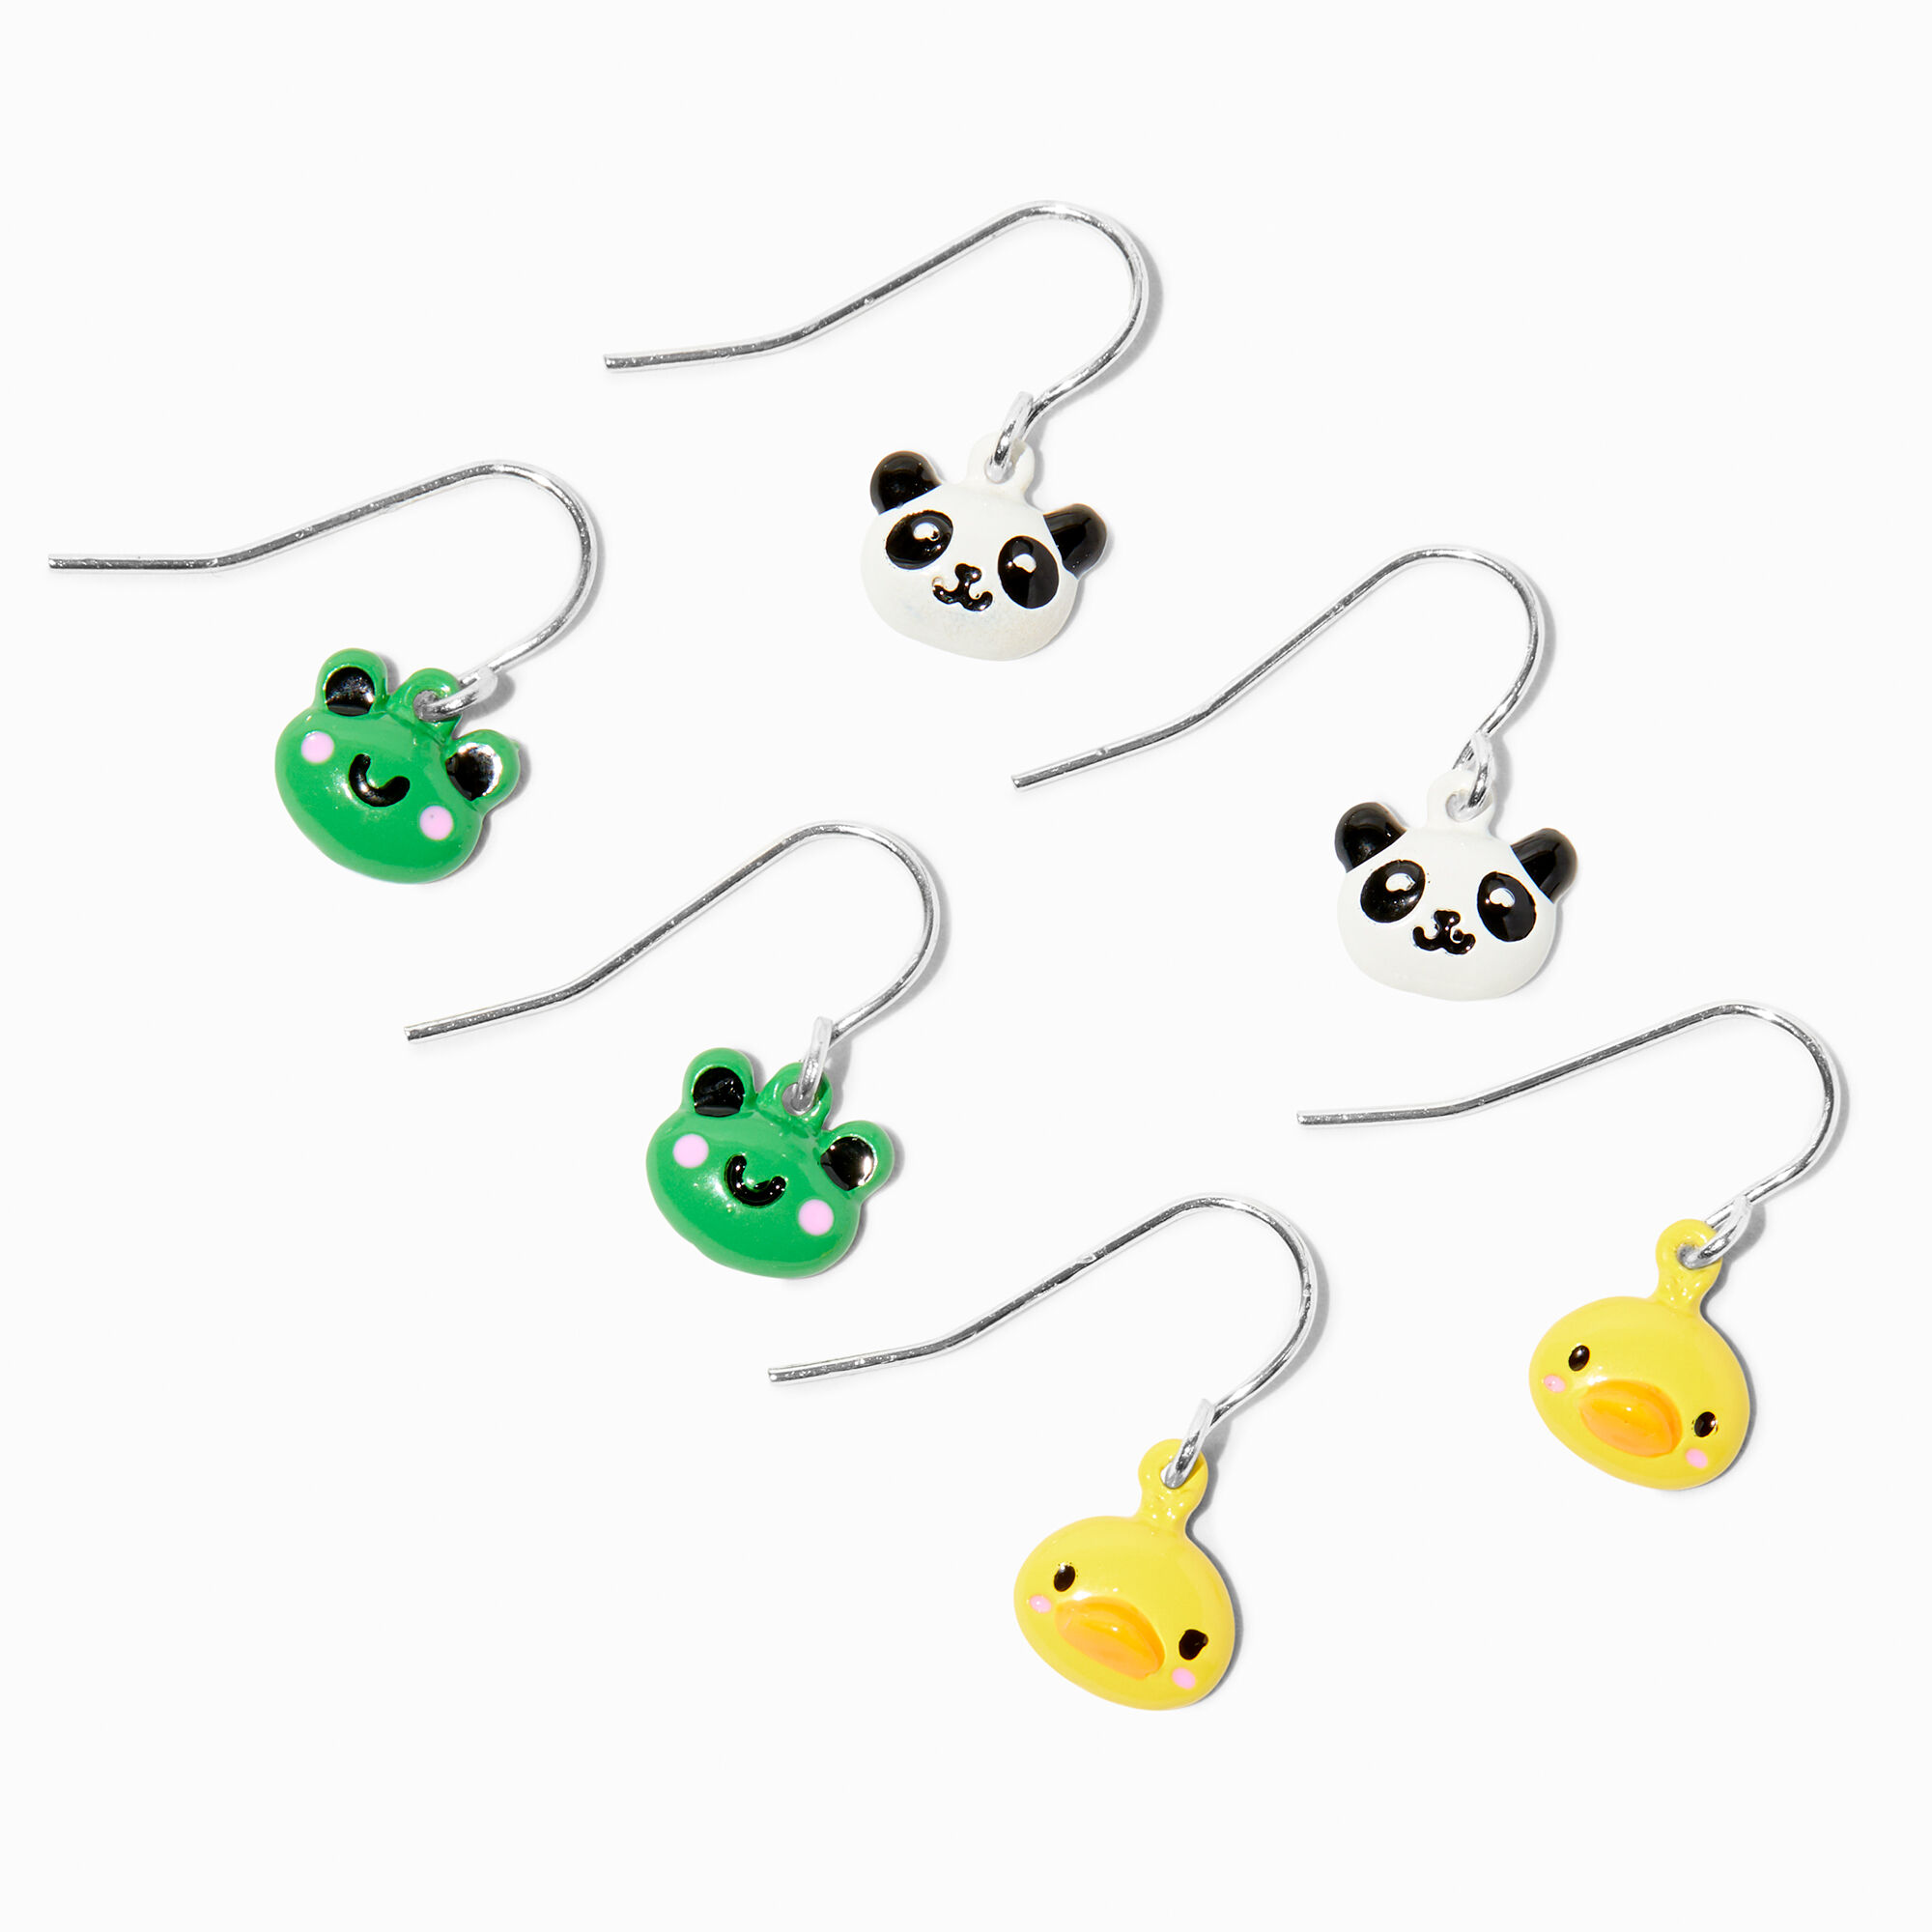 View Claires Animal 1 Drop Earrings 3 Pack Silver information